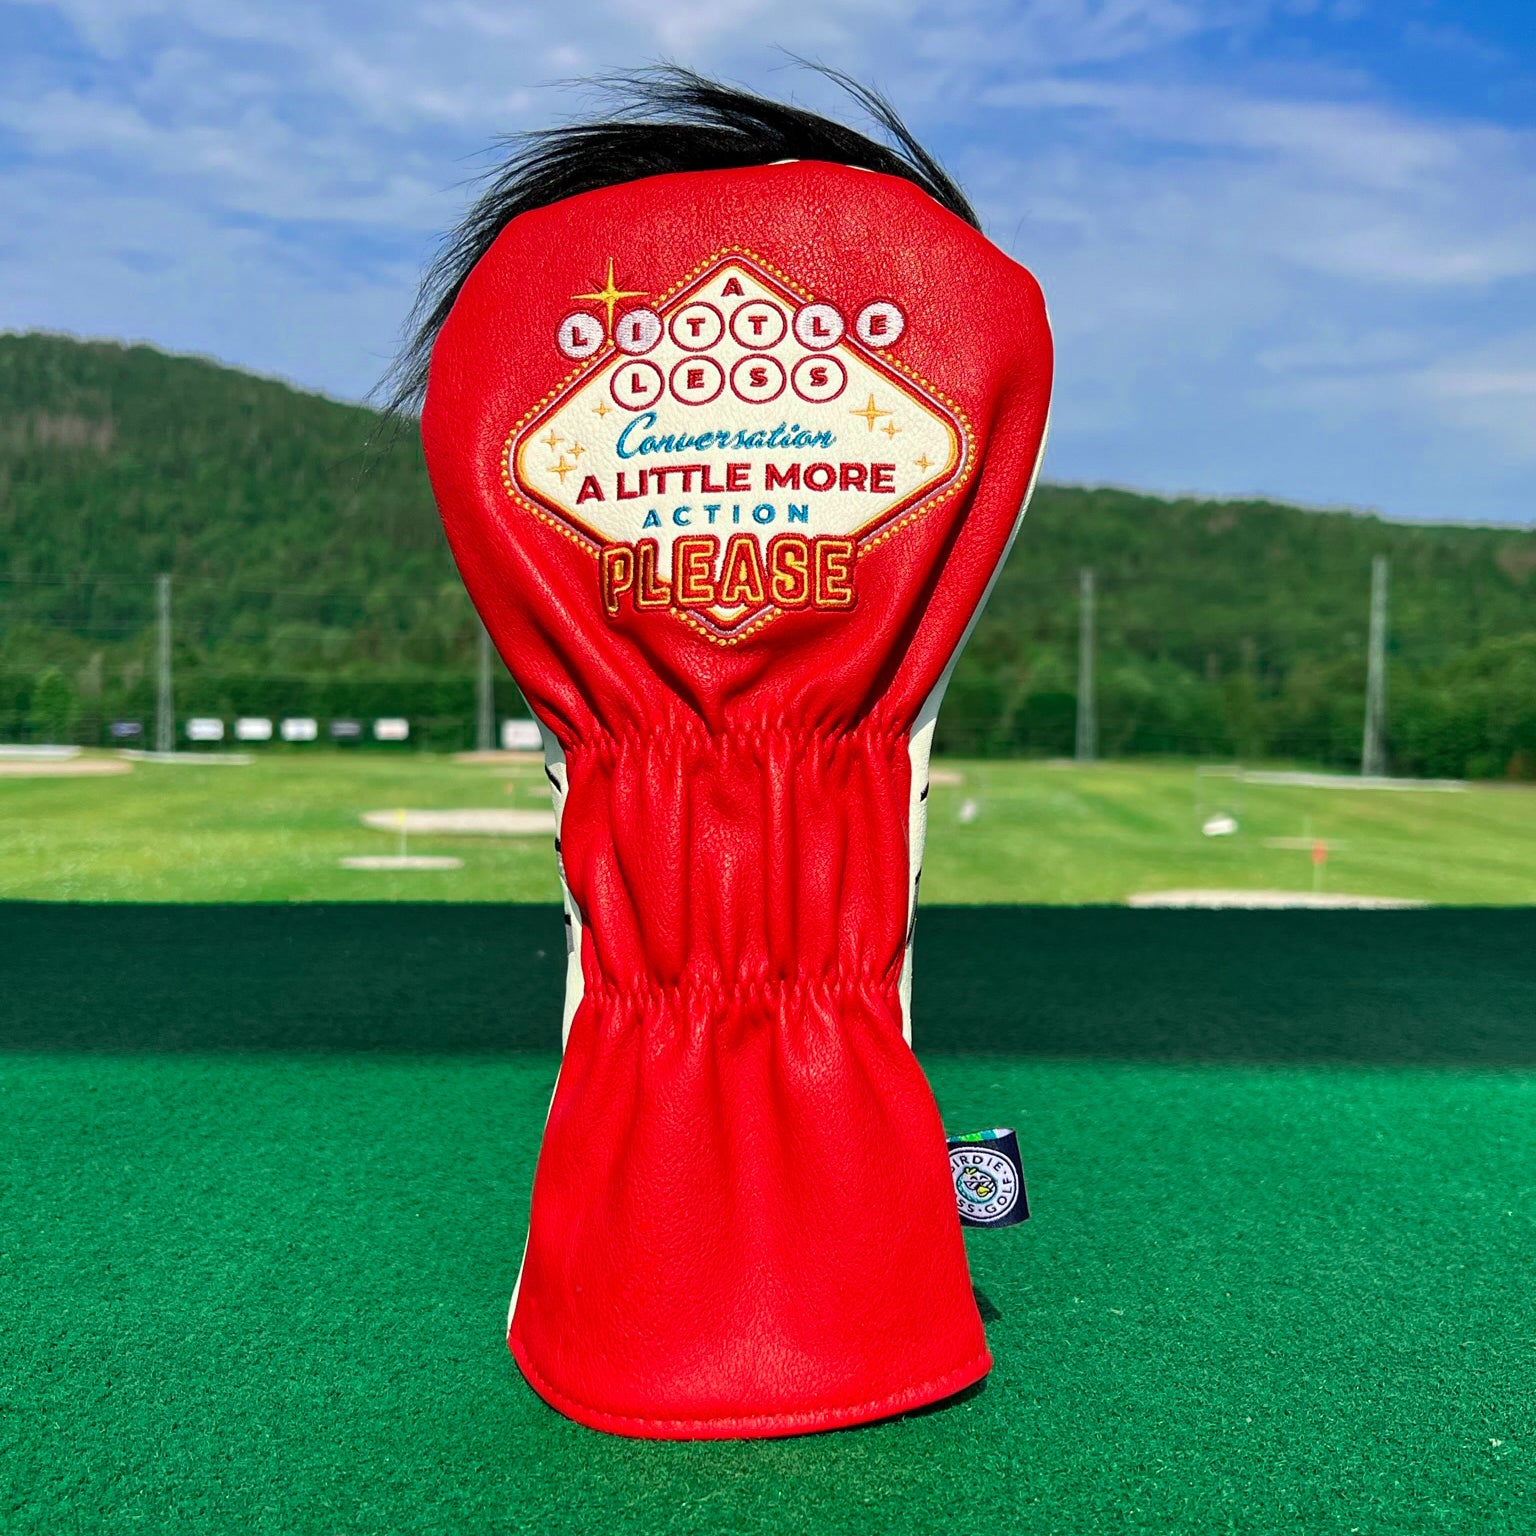 The King Headcover